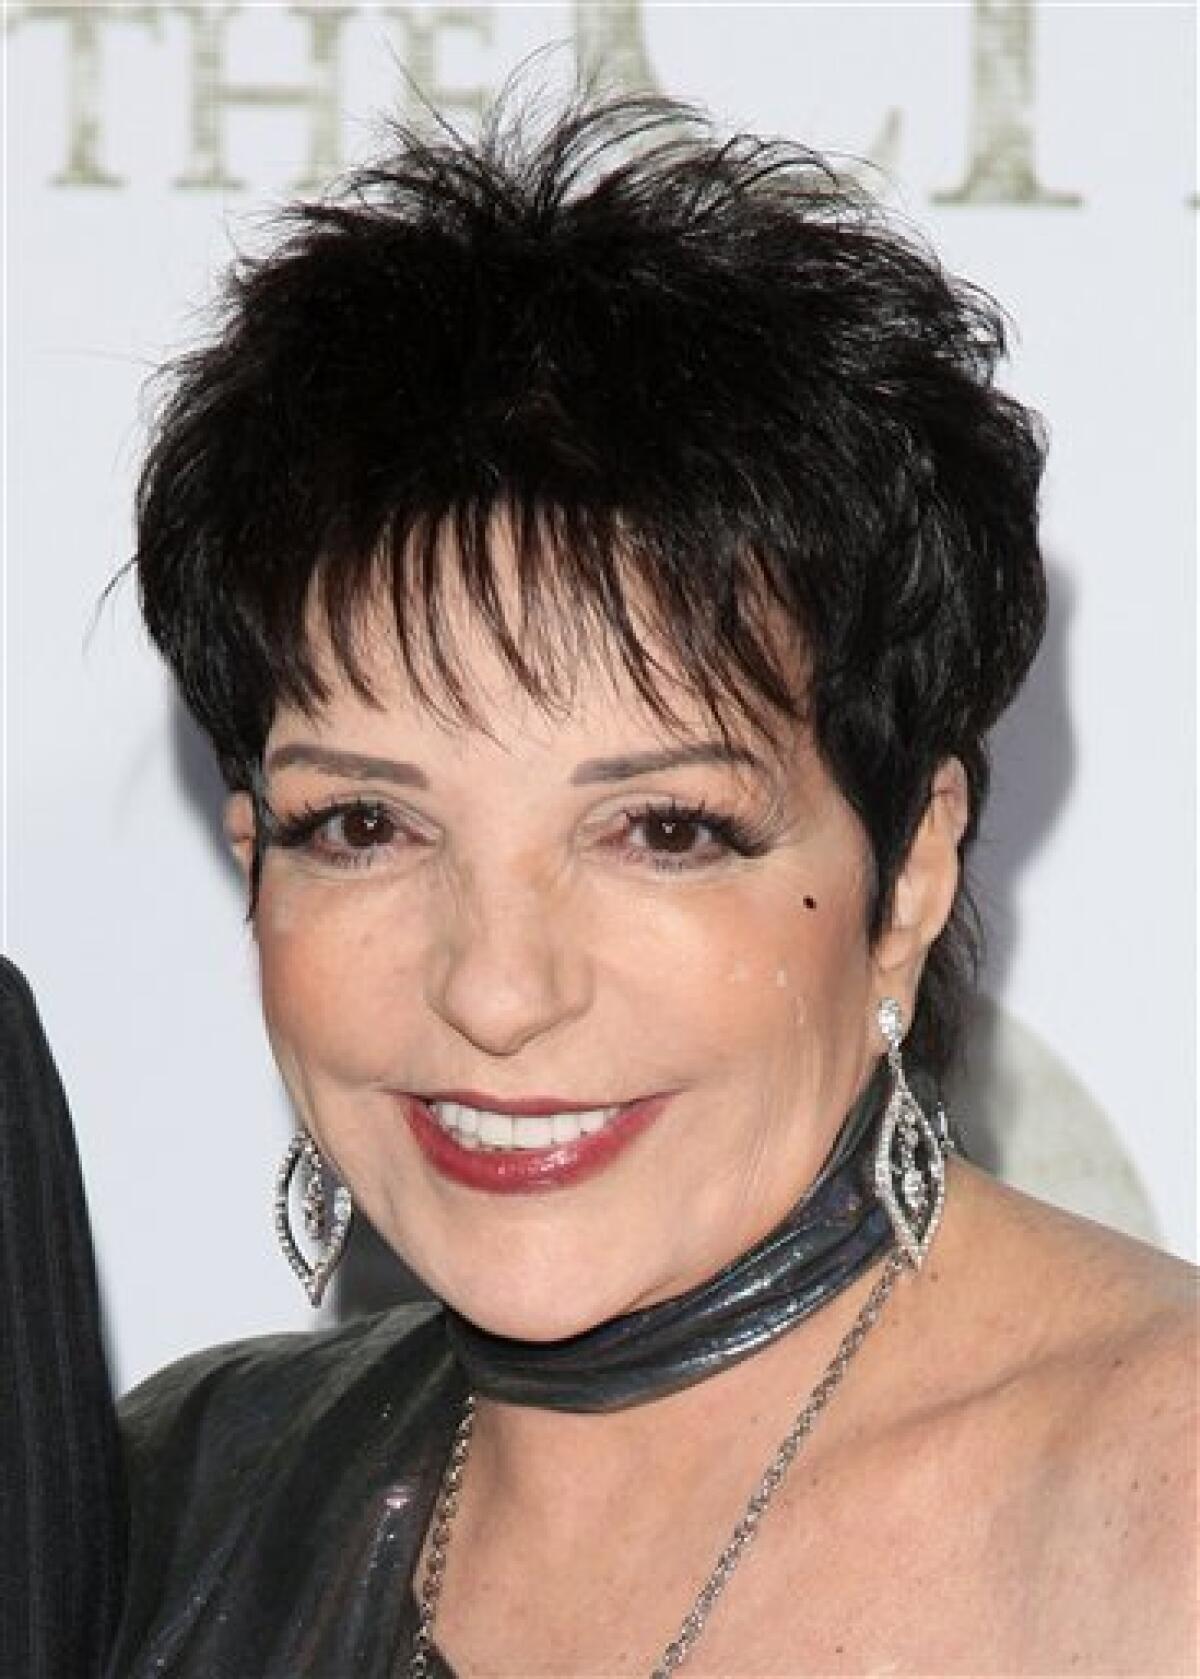 FILE - In this May 24, 2010 file photo, Liza Minnelli attends the premiere of "Sex And The City 2" at Radio City Music Hall in New York. (AP Photo/Peter Kramer, file)